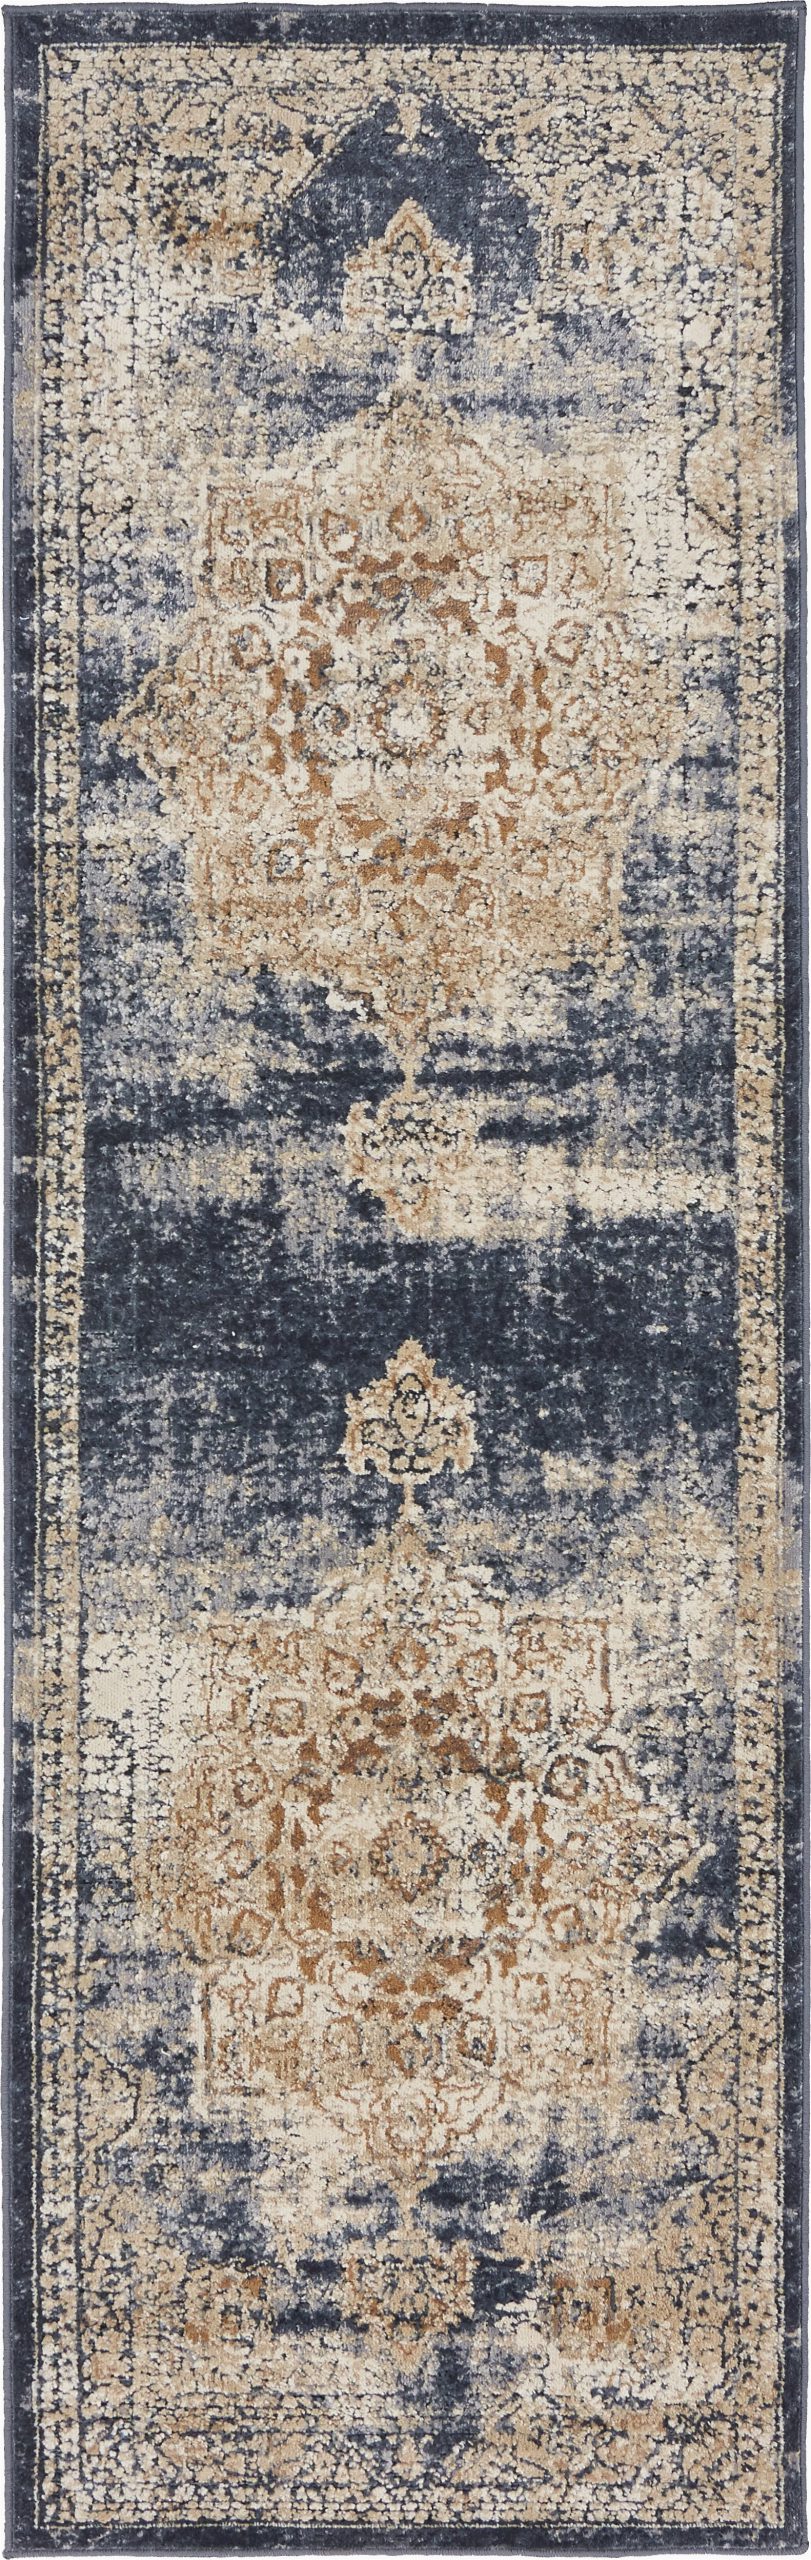 runner area rugs on sale c a1249 a 8